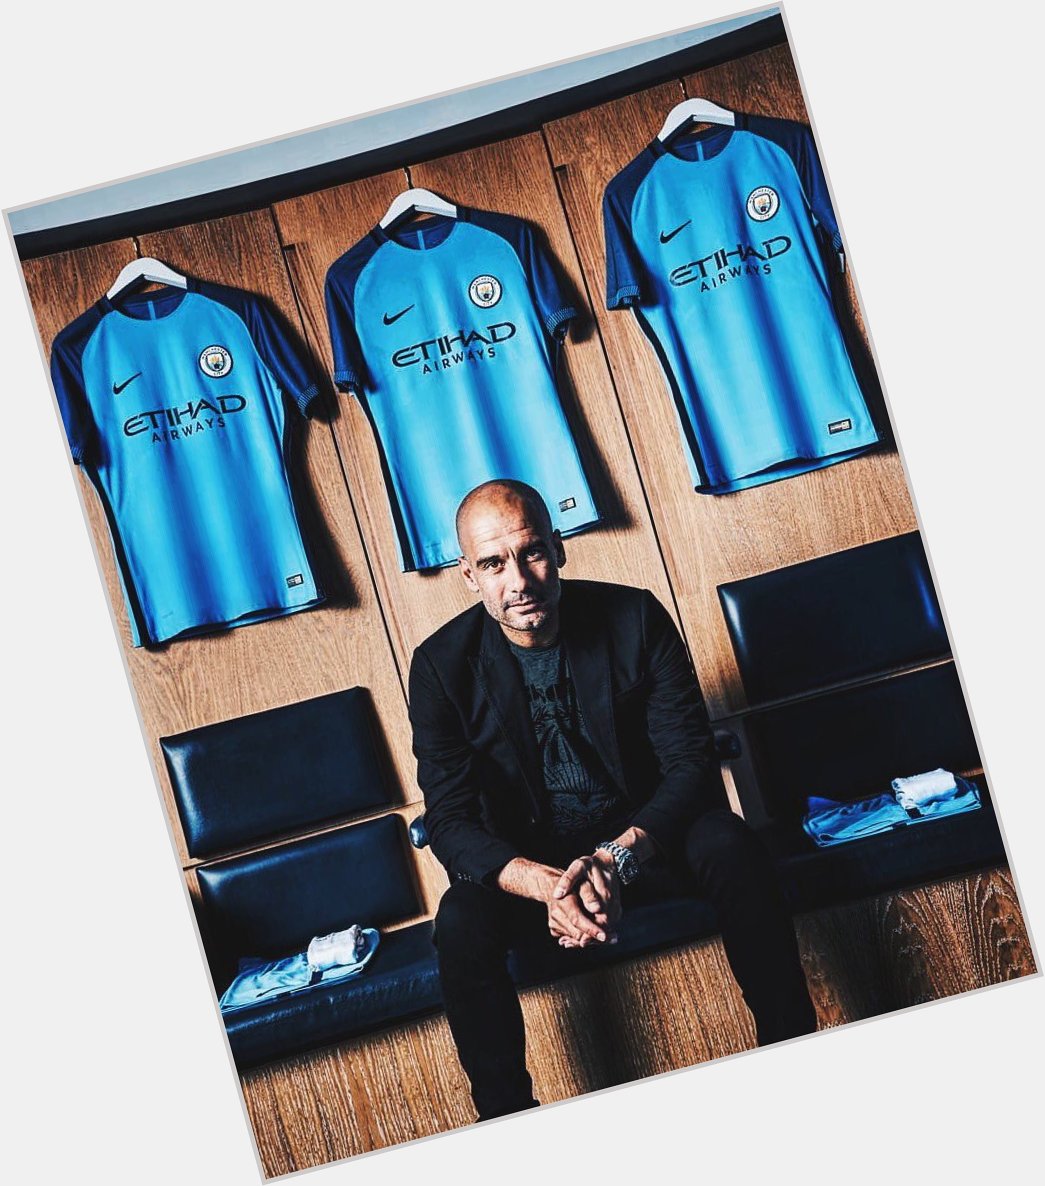 Happy birthday to Man City manager Pep Guardiola 

He turns 46 today! 